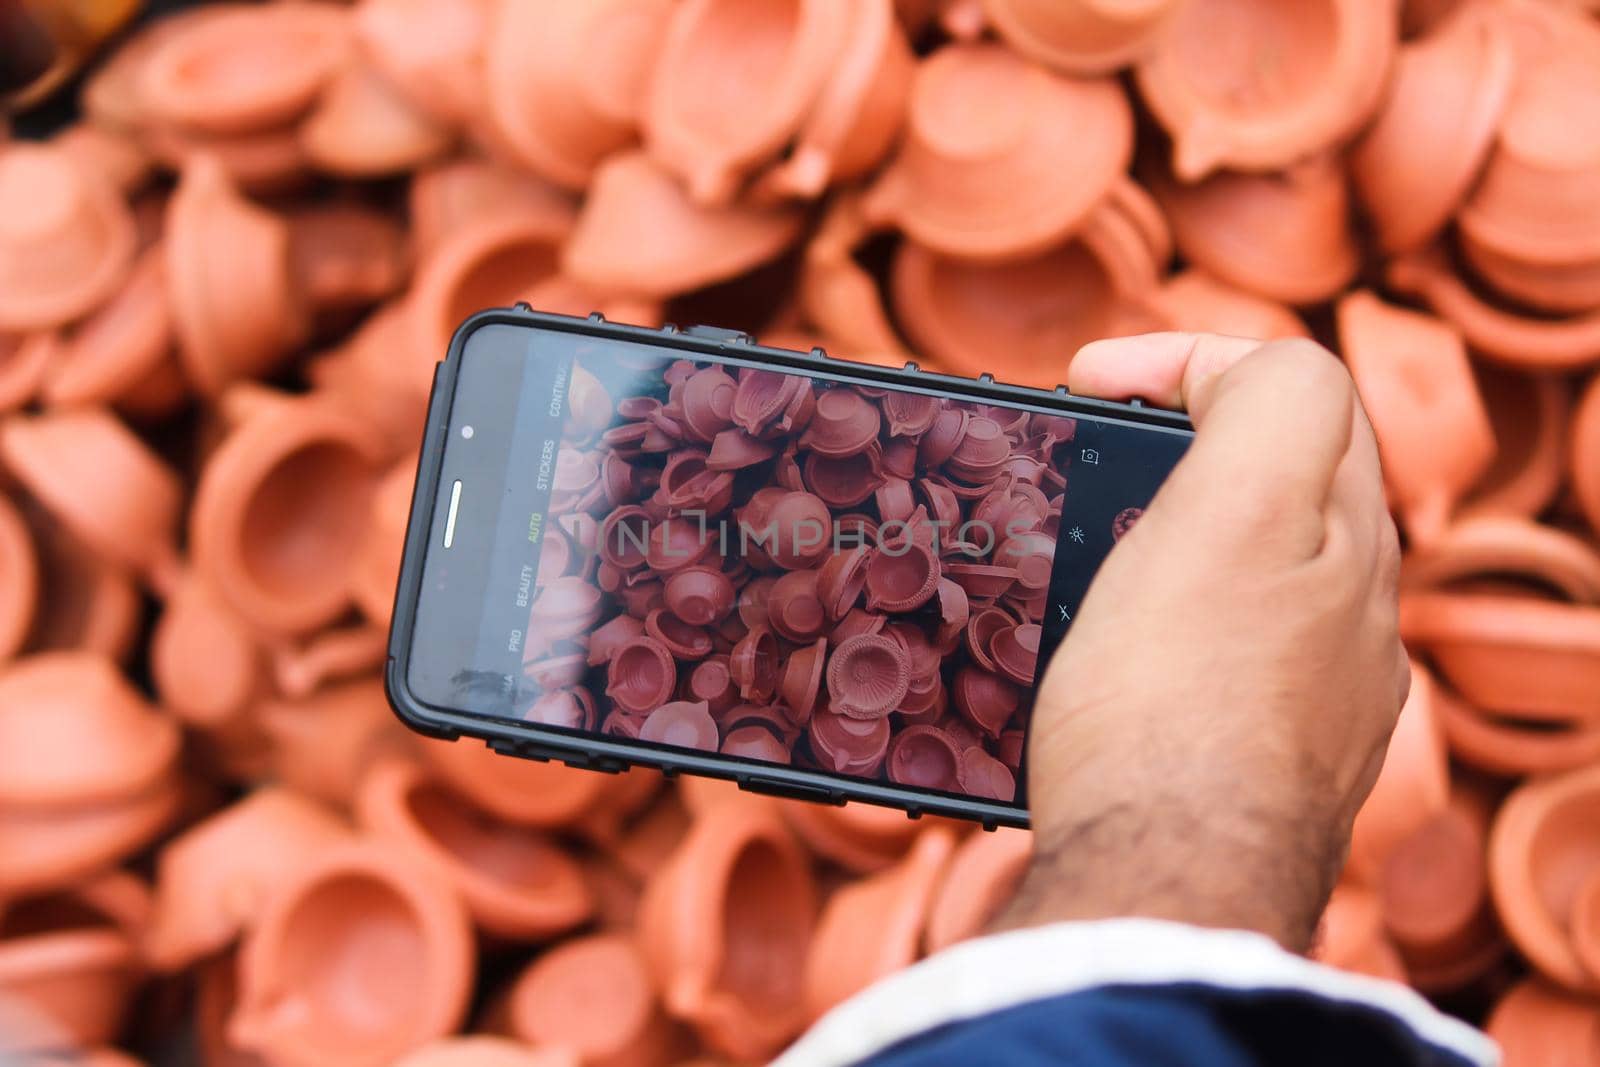 Man taking photos of clay lamps (Diya) with his phone at a market in India for the festival of Diwali